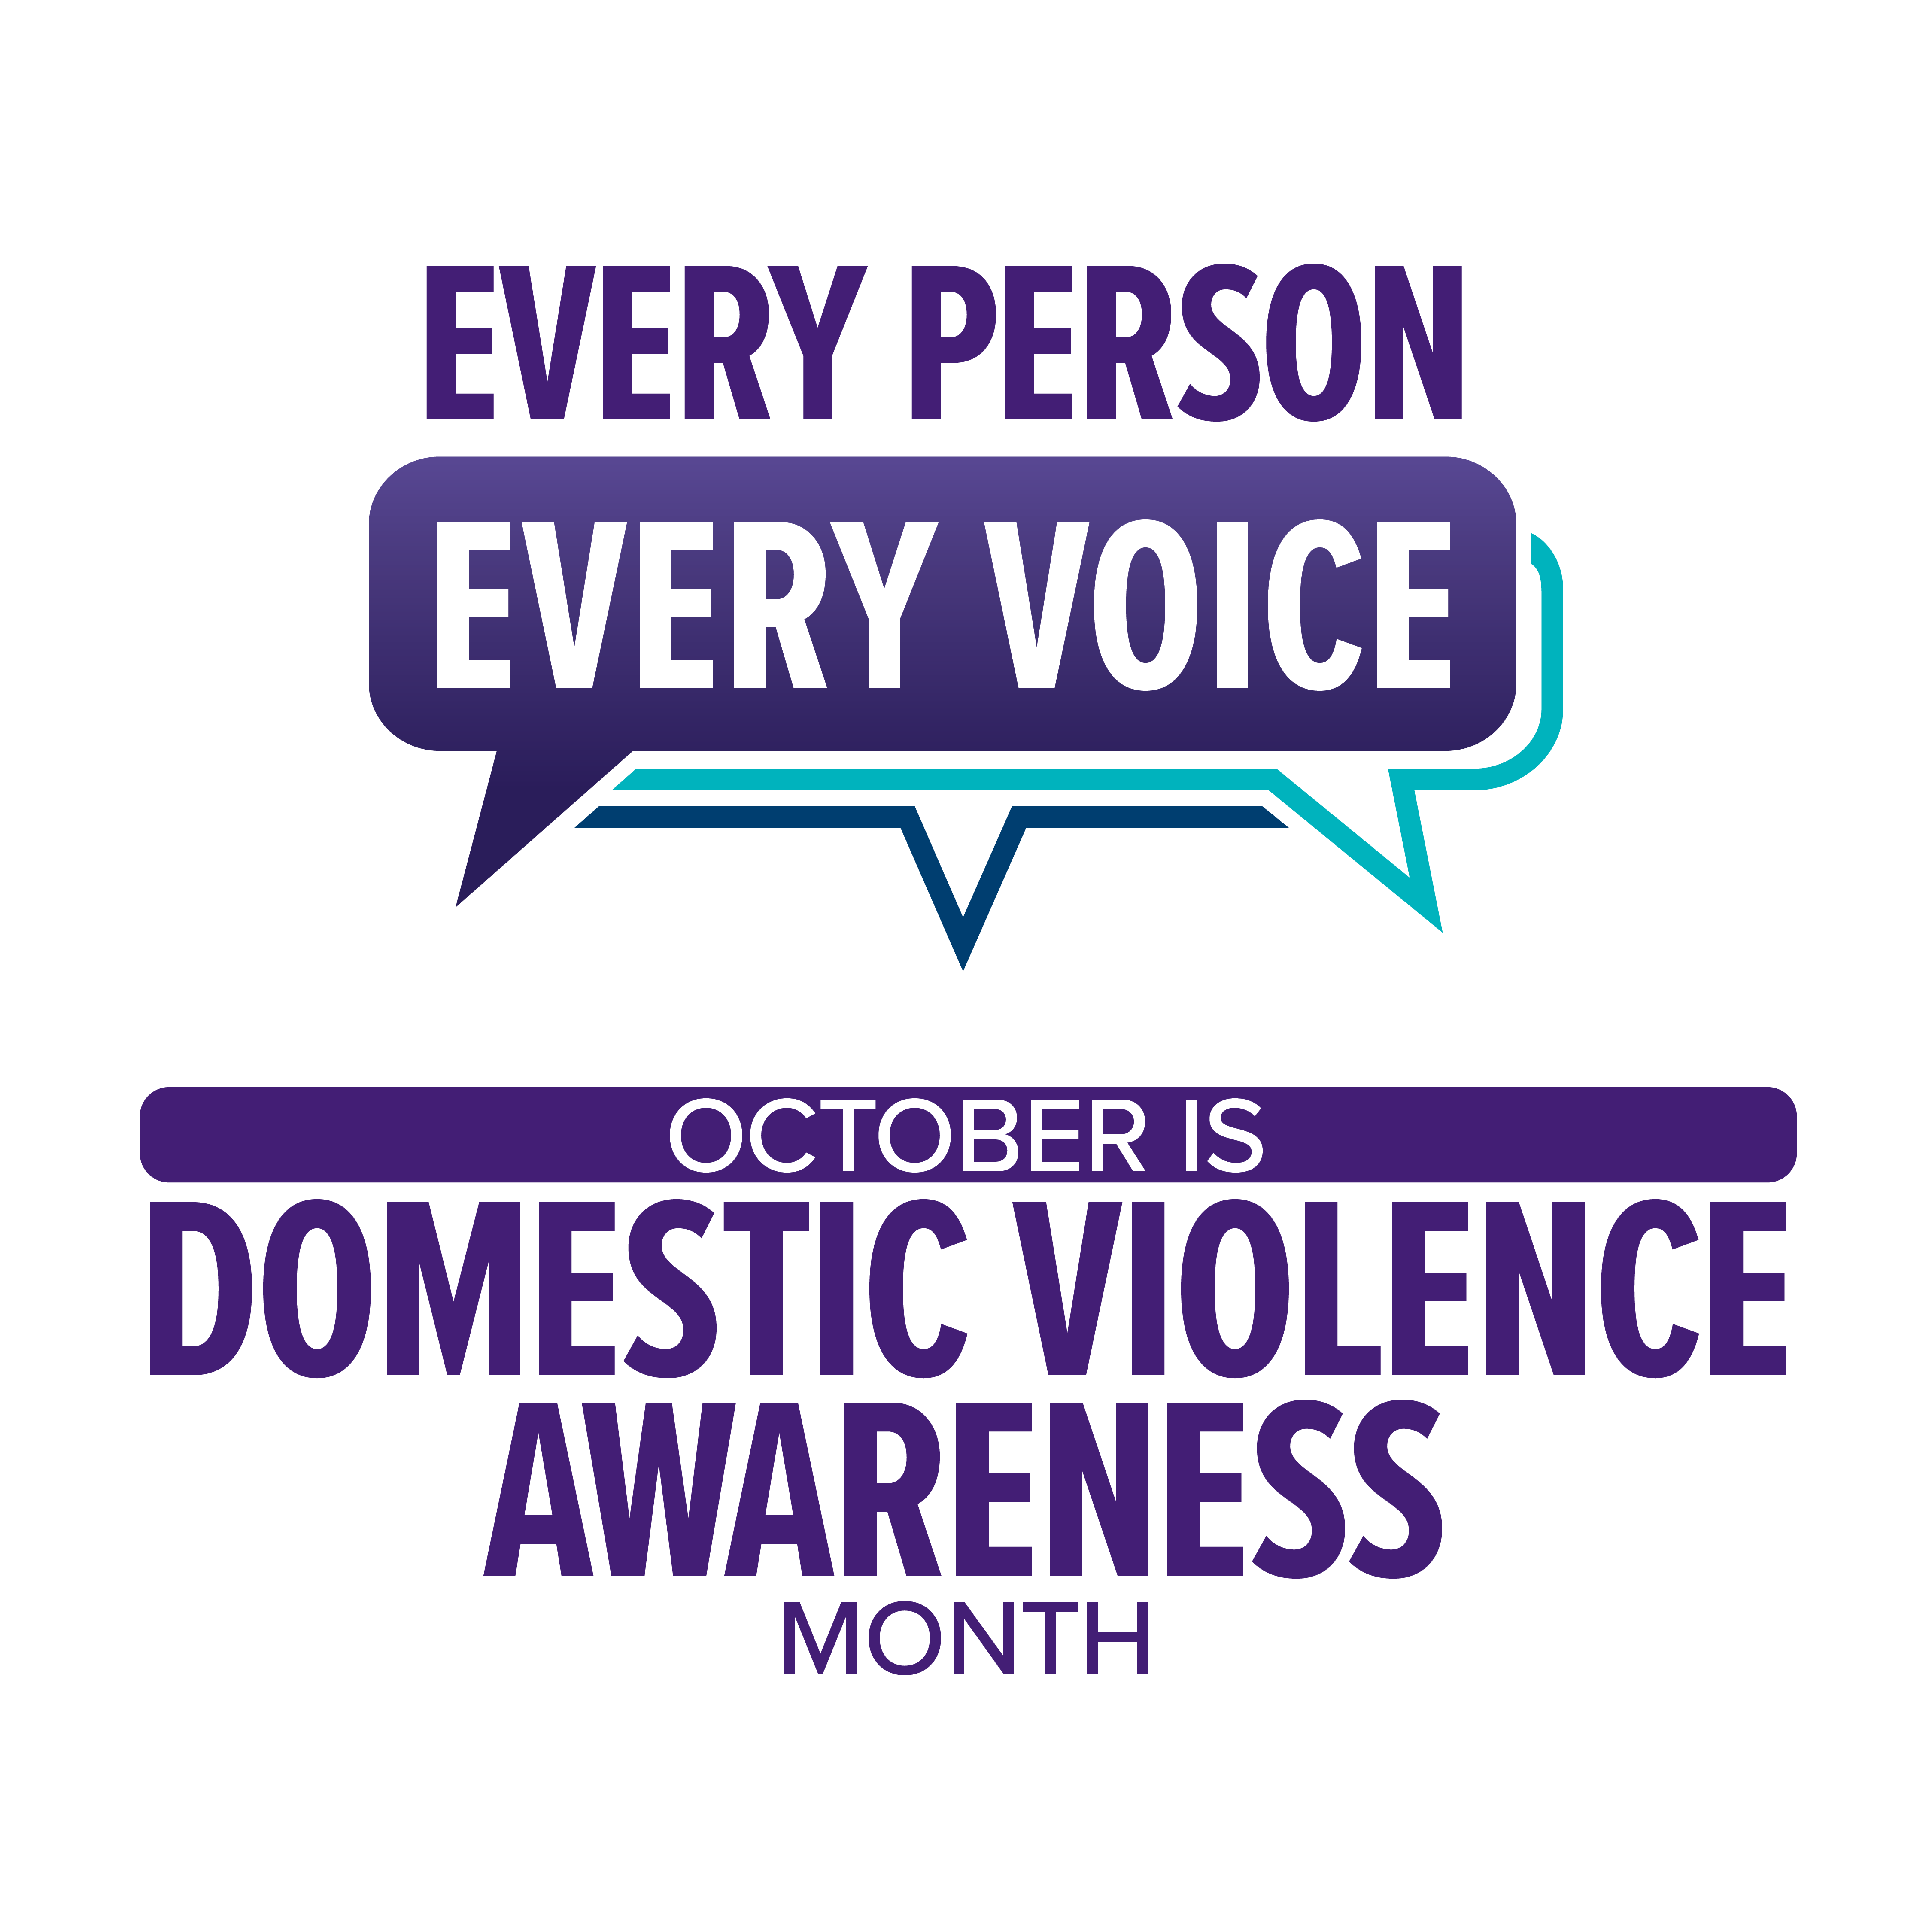 Every Person, Every Voice; October is Domestic Violence Awareness Month